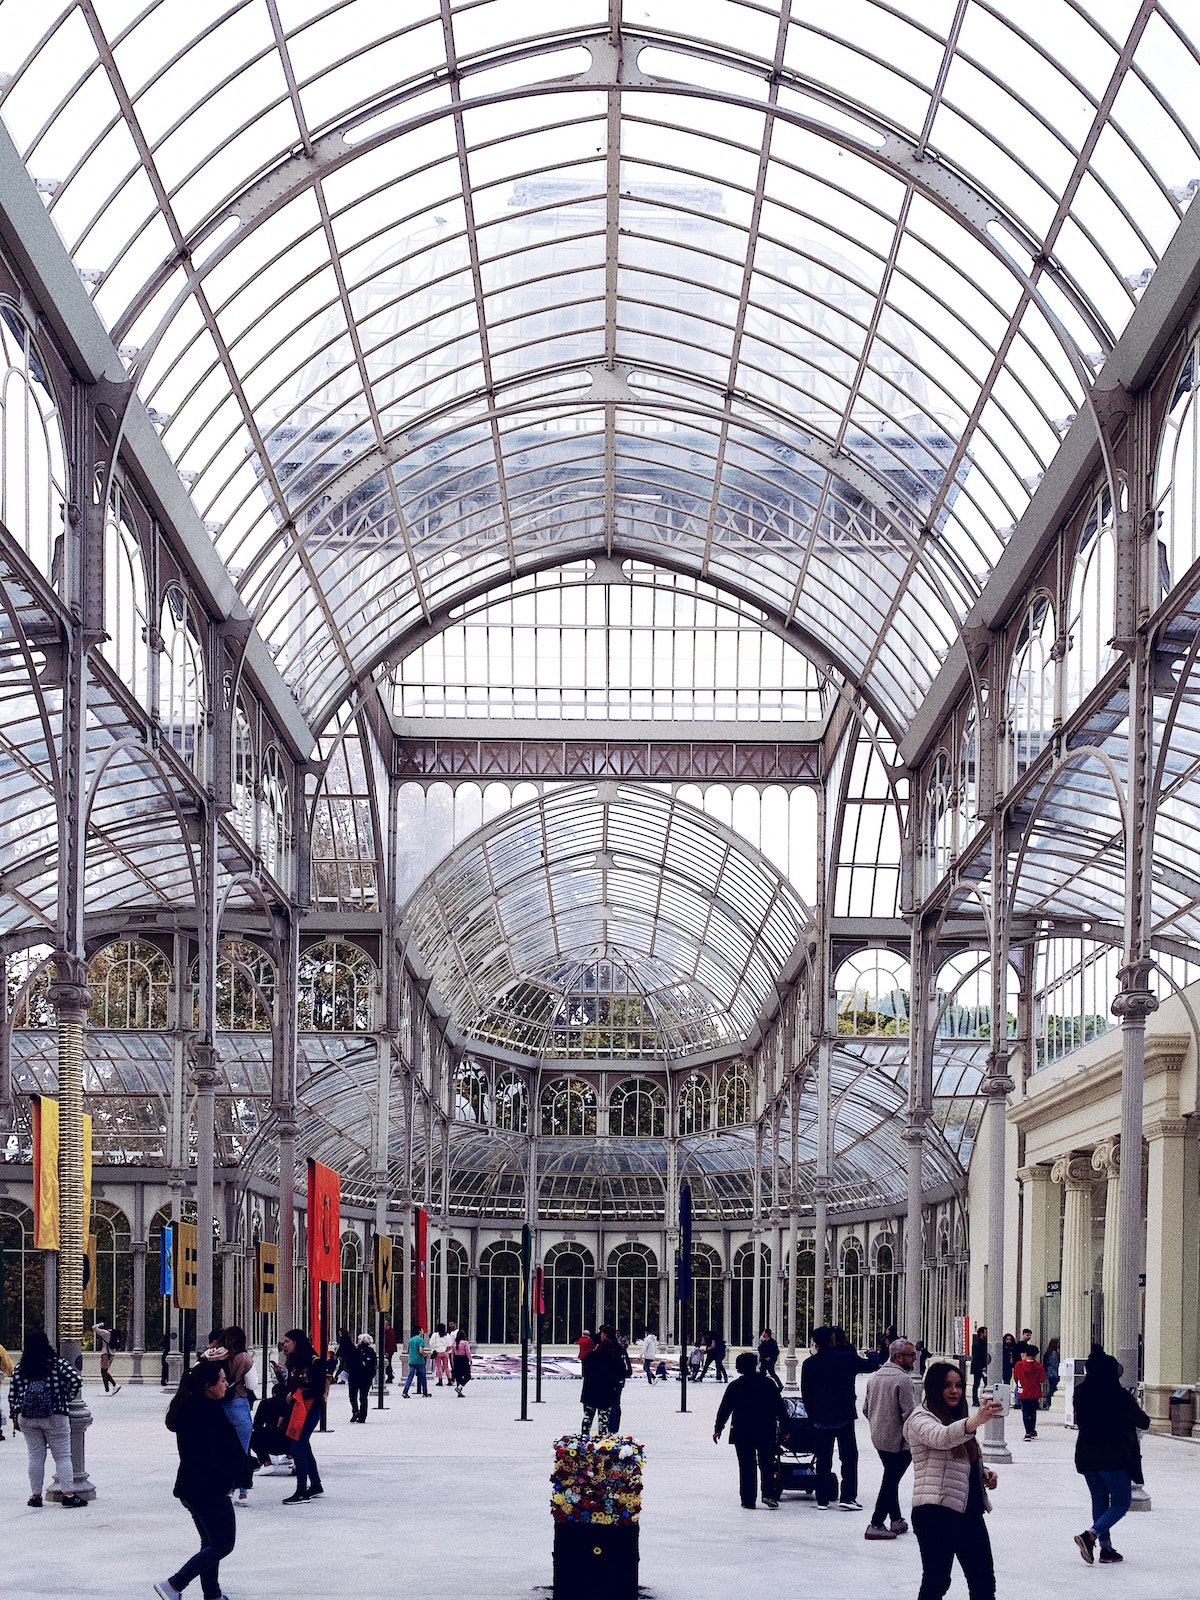 Crowd of people walking around a large indoor space with a curved glass roof.